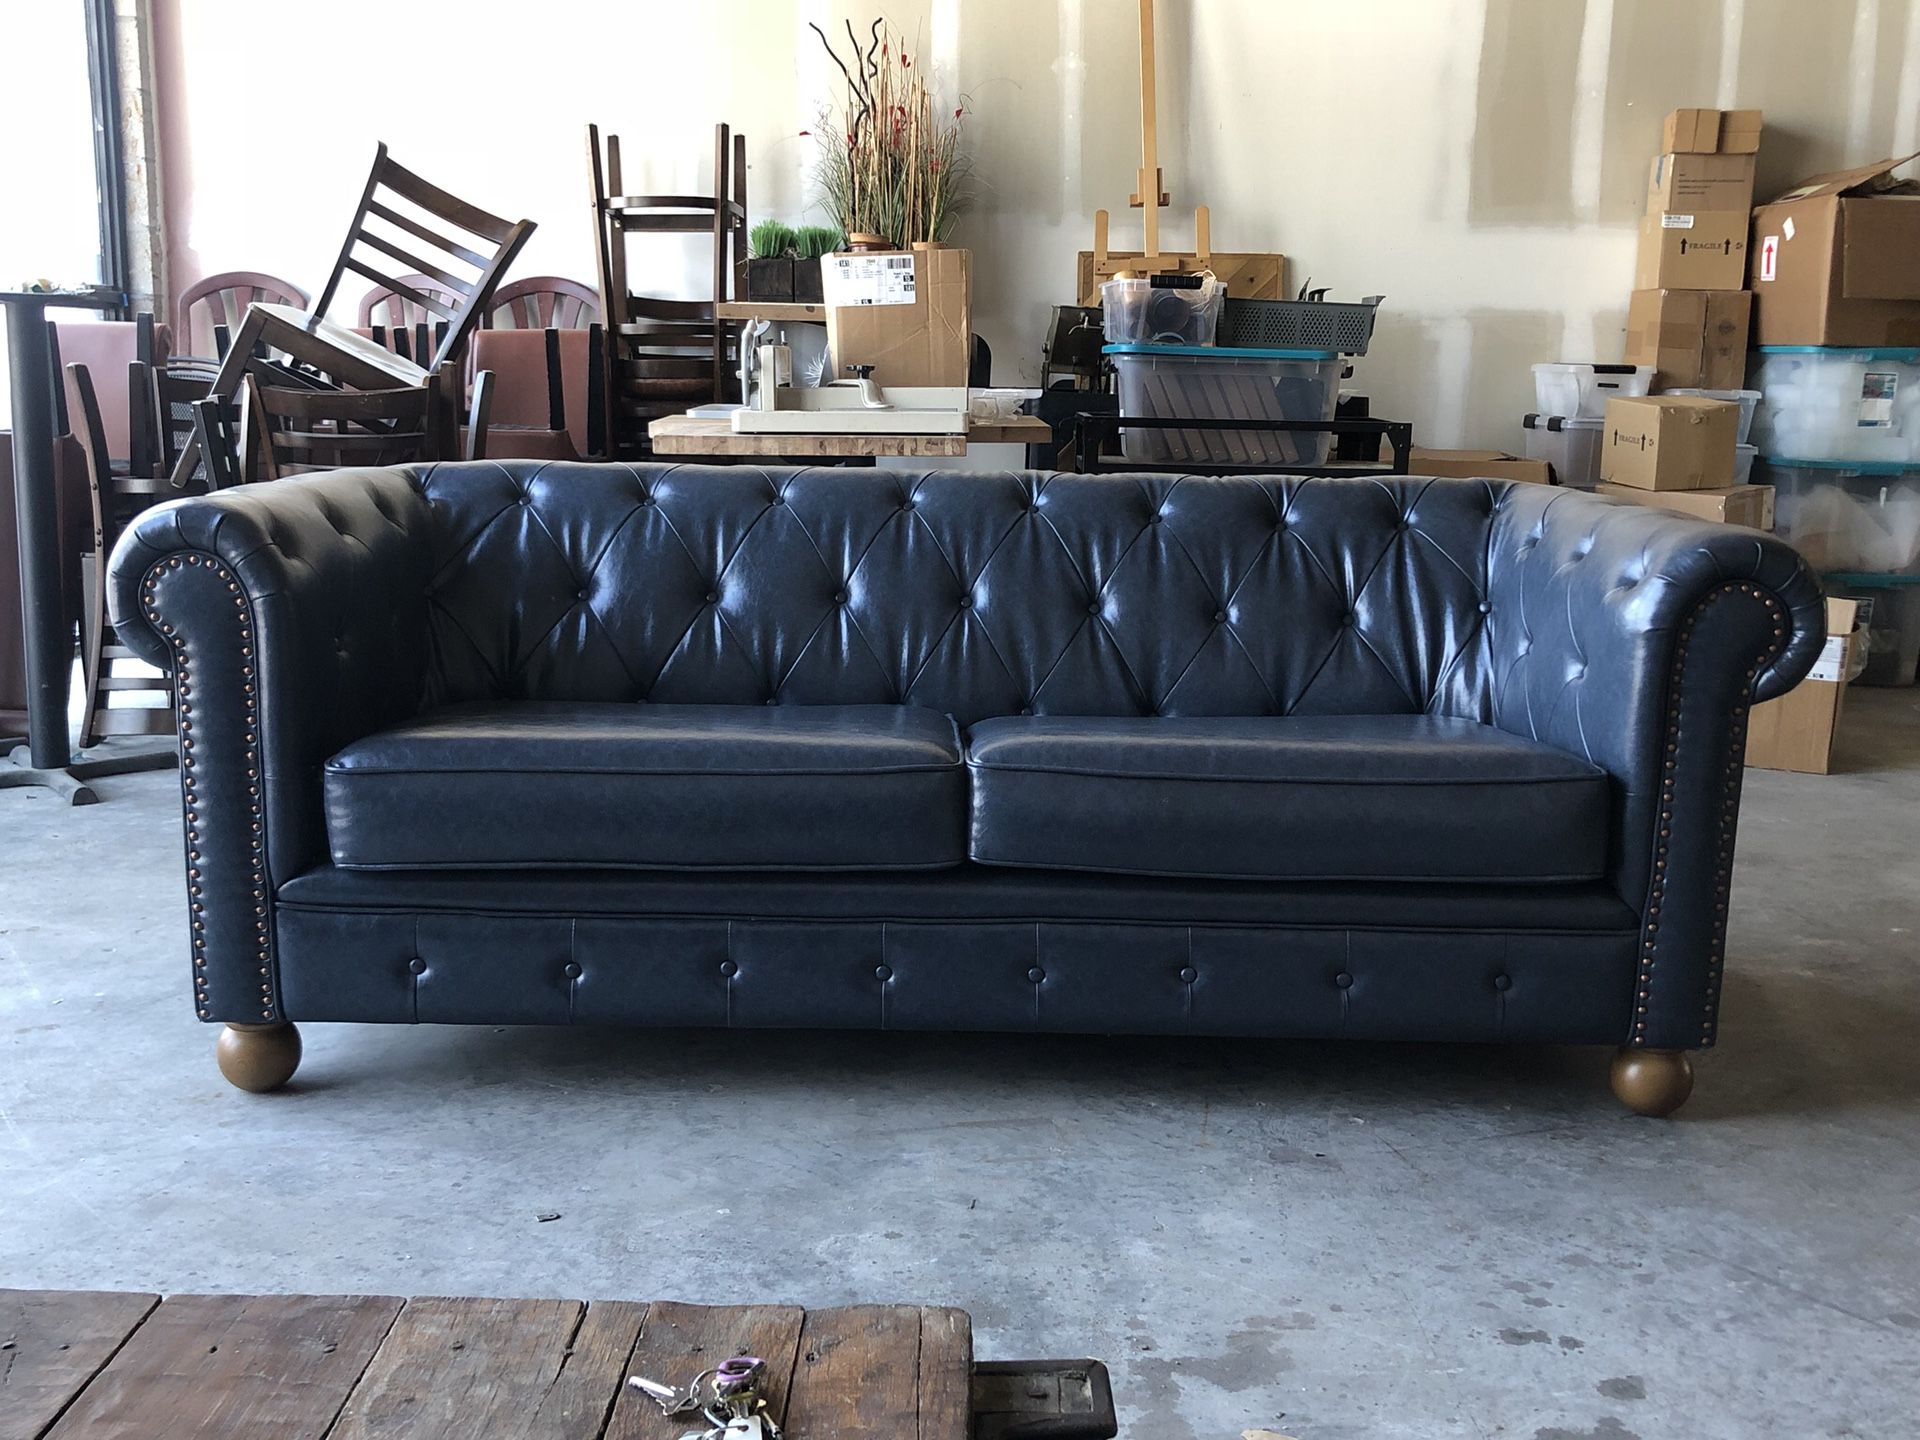 Tufted Deep Blue Couch